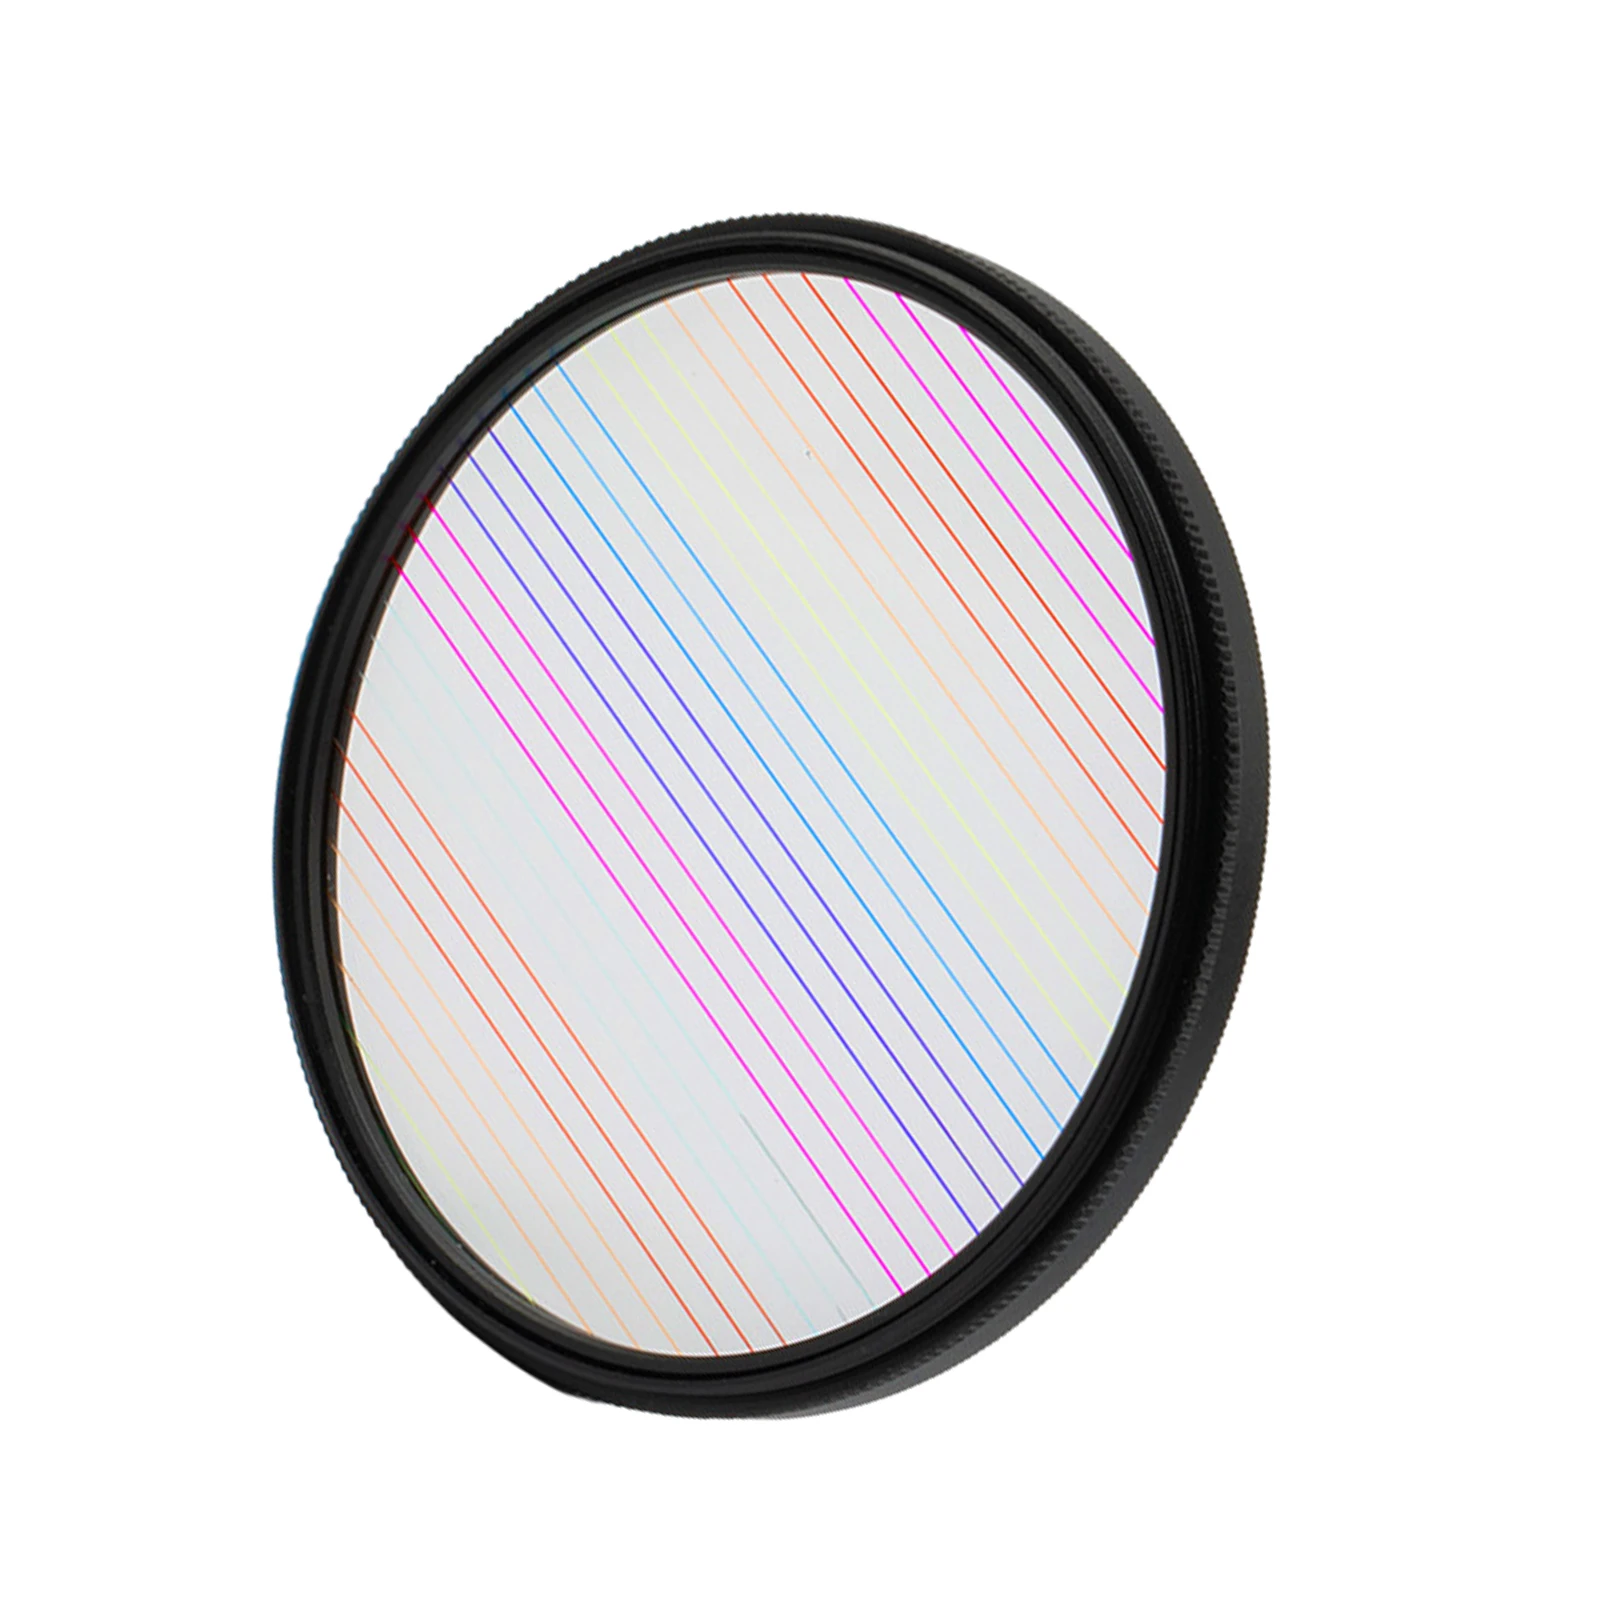 High Quality Streak Filter Anamorphic Optical Glass with Rotating Ring for DSLR Cinematice Video Camera Accessories Blue Rainbow